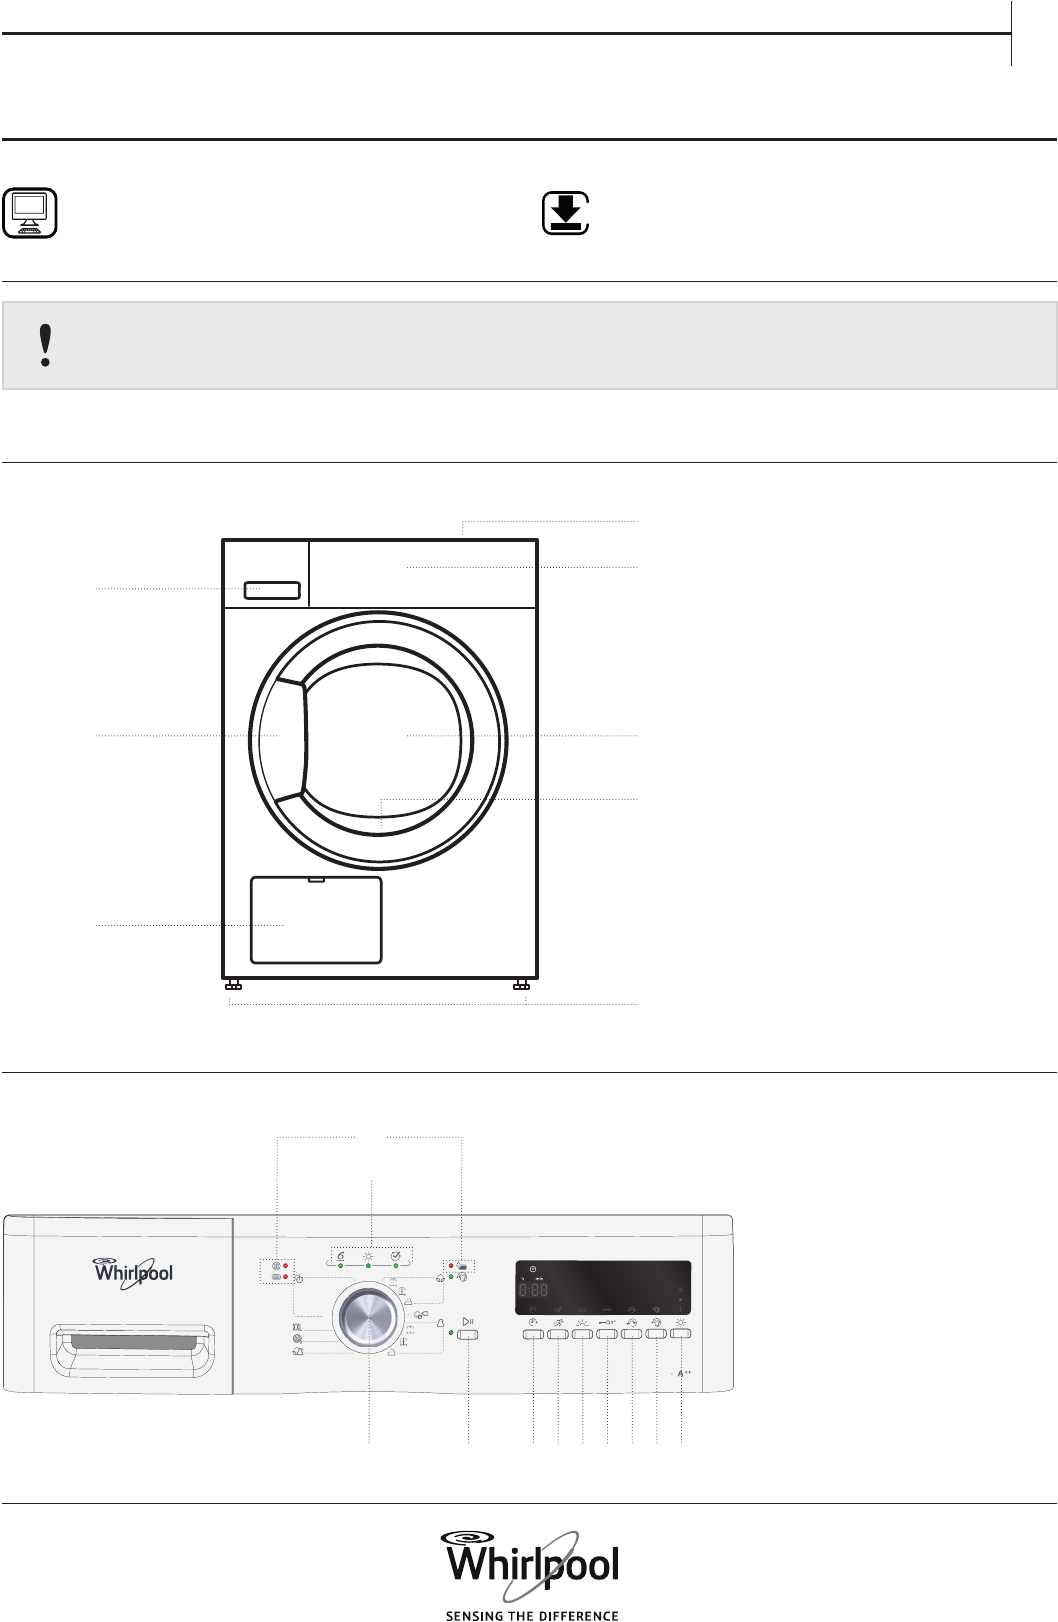 Manual Whirlpool HDLX 80410 (page 1 of 8) (English)